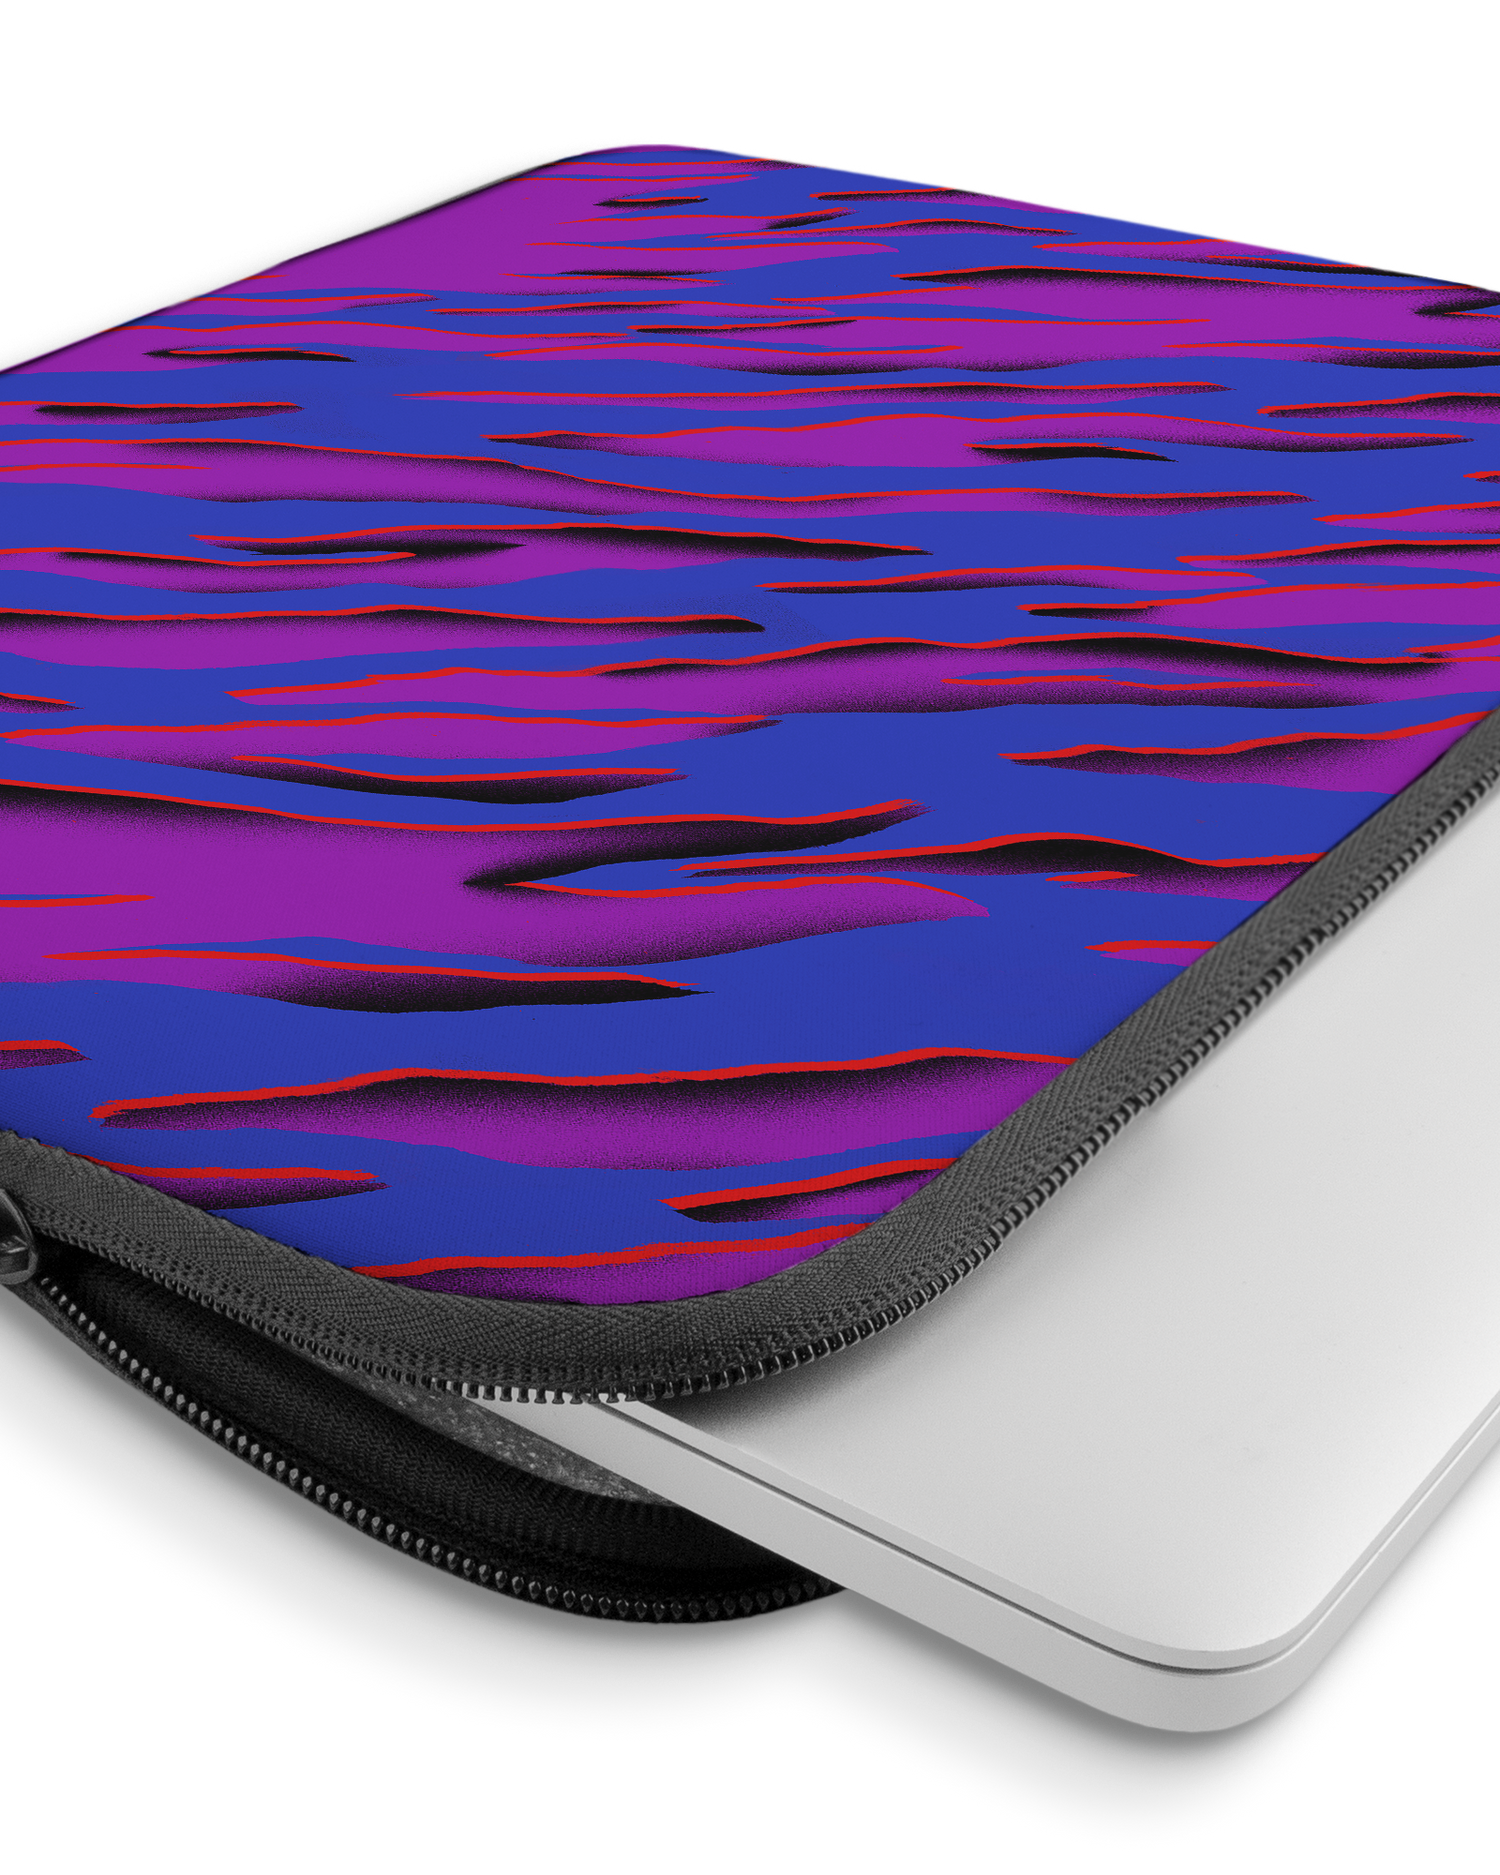 Electric Ocean 2 Laptop Case 15 inch with device inside